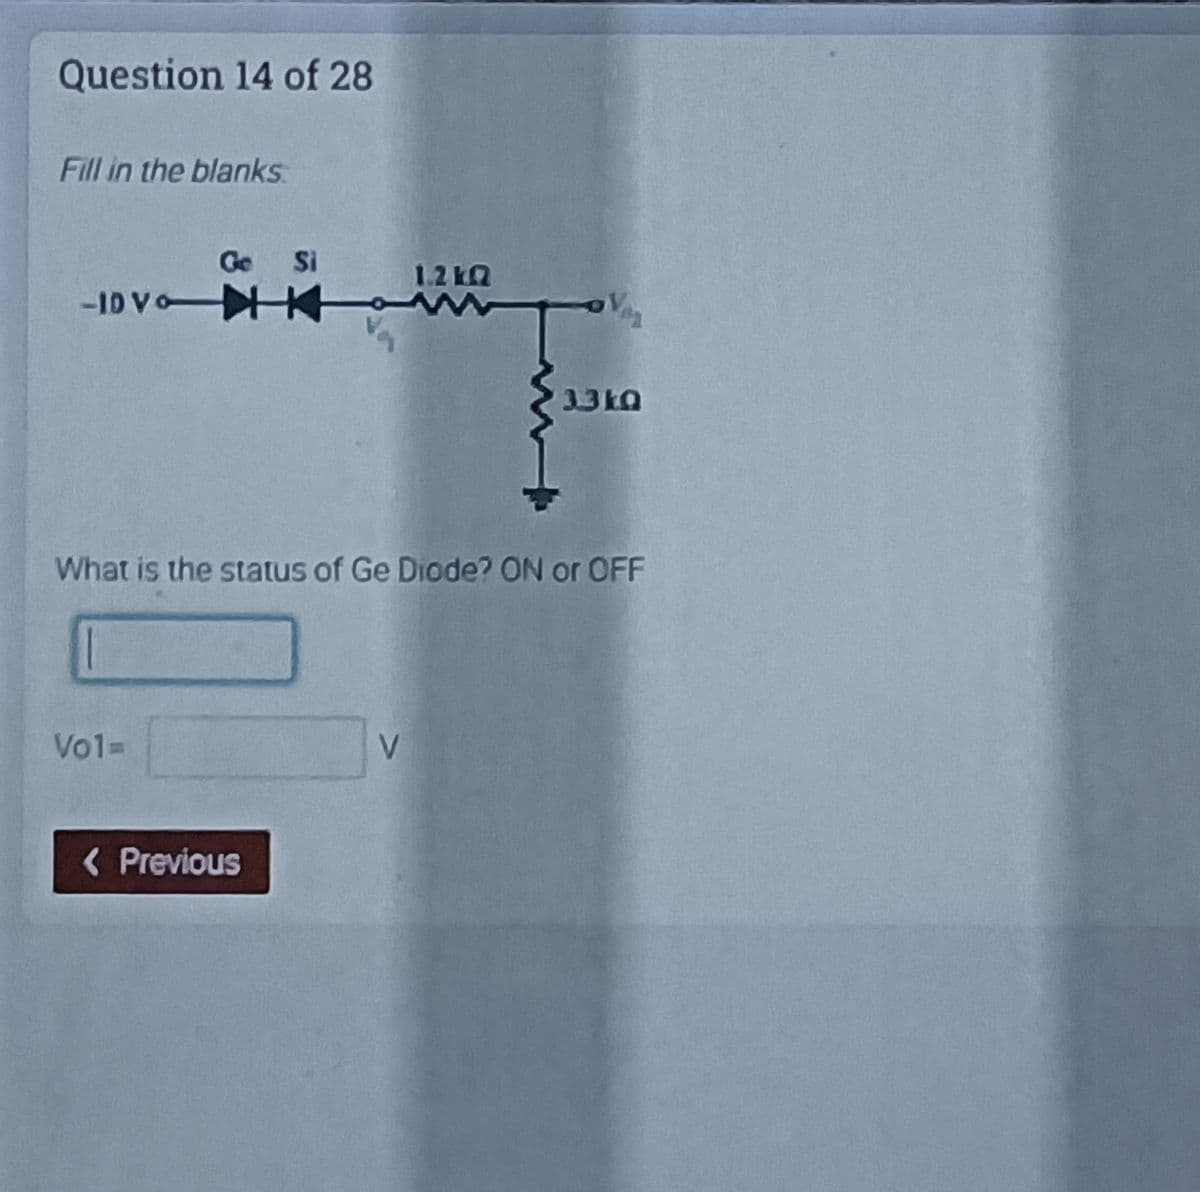 Question 14 of 28
Fill in the blanks
Ge
Si
1.2 kQ
-1D Vo K
What is the status of Ge Diode? ON or OFF
Vo1=
( Previous
